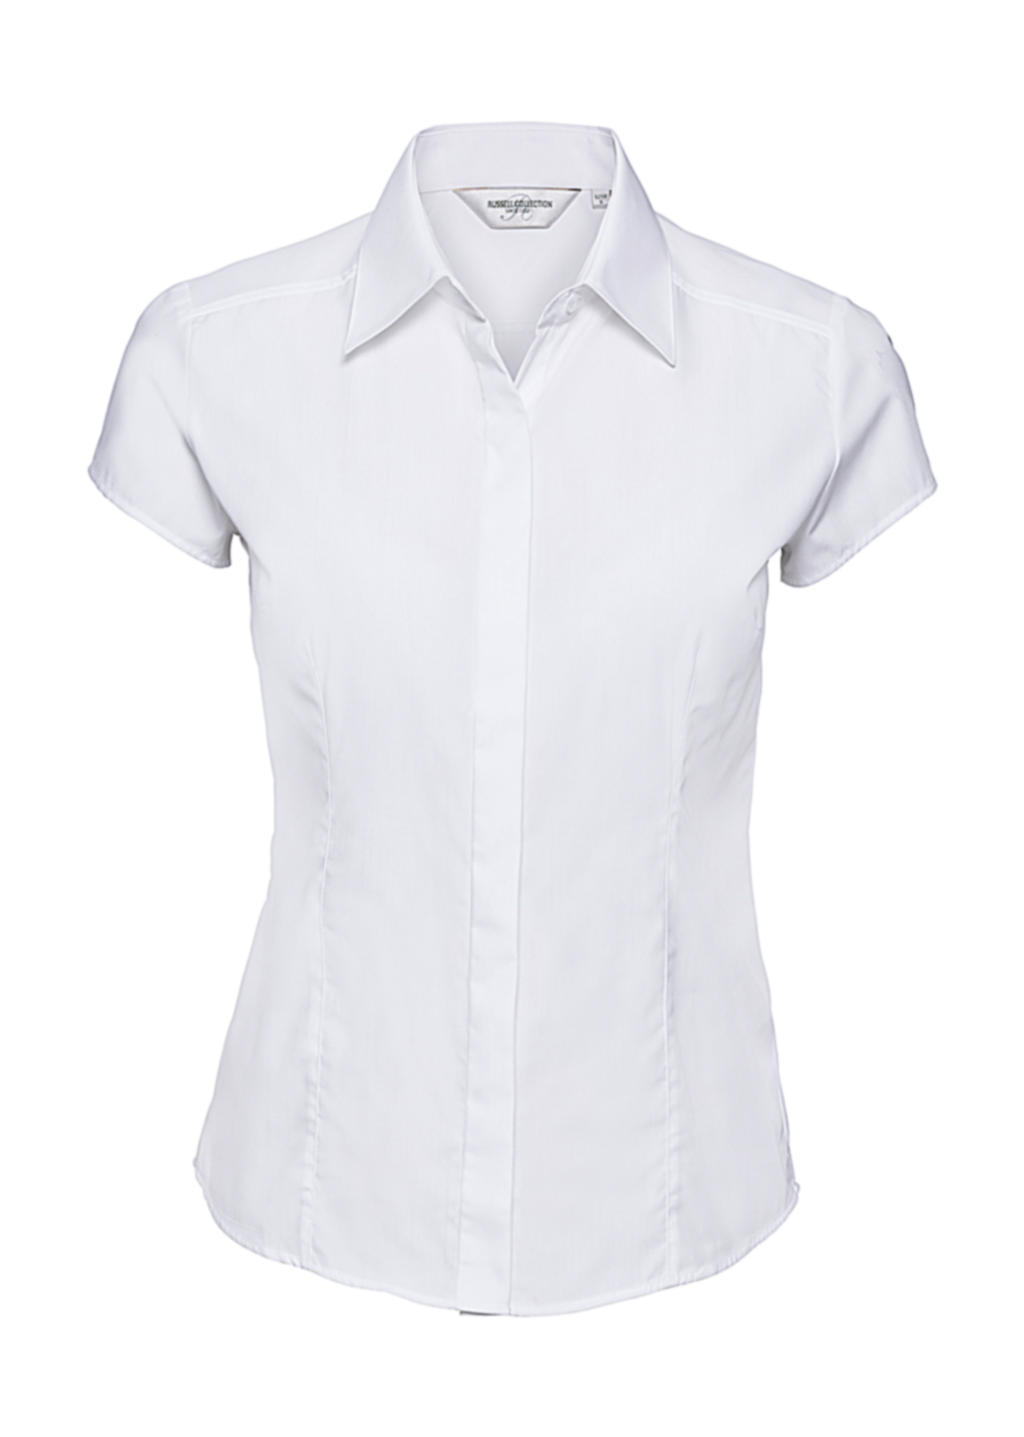  Ladies Fitted Poplin Shirt in Farbe White